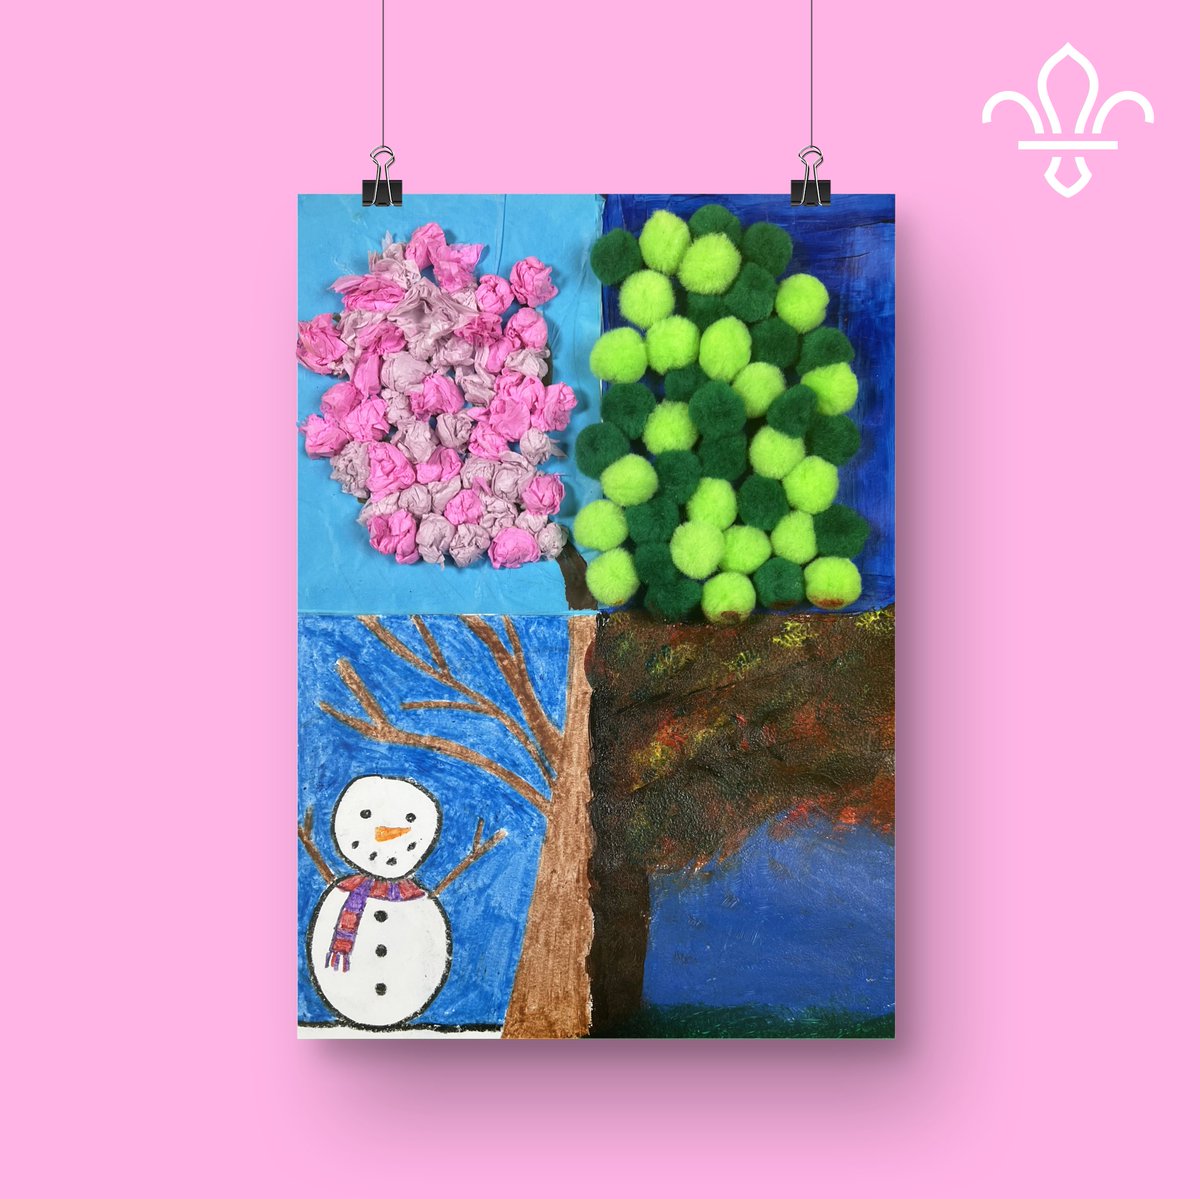 Happy First Day of Spring 2024! Why not celebrate by creating four corner seasonal pictures to show how trees change throughout the year? See how many different techniques and materials you can use! 🌸 bit.ly/3VhDo16